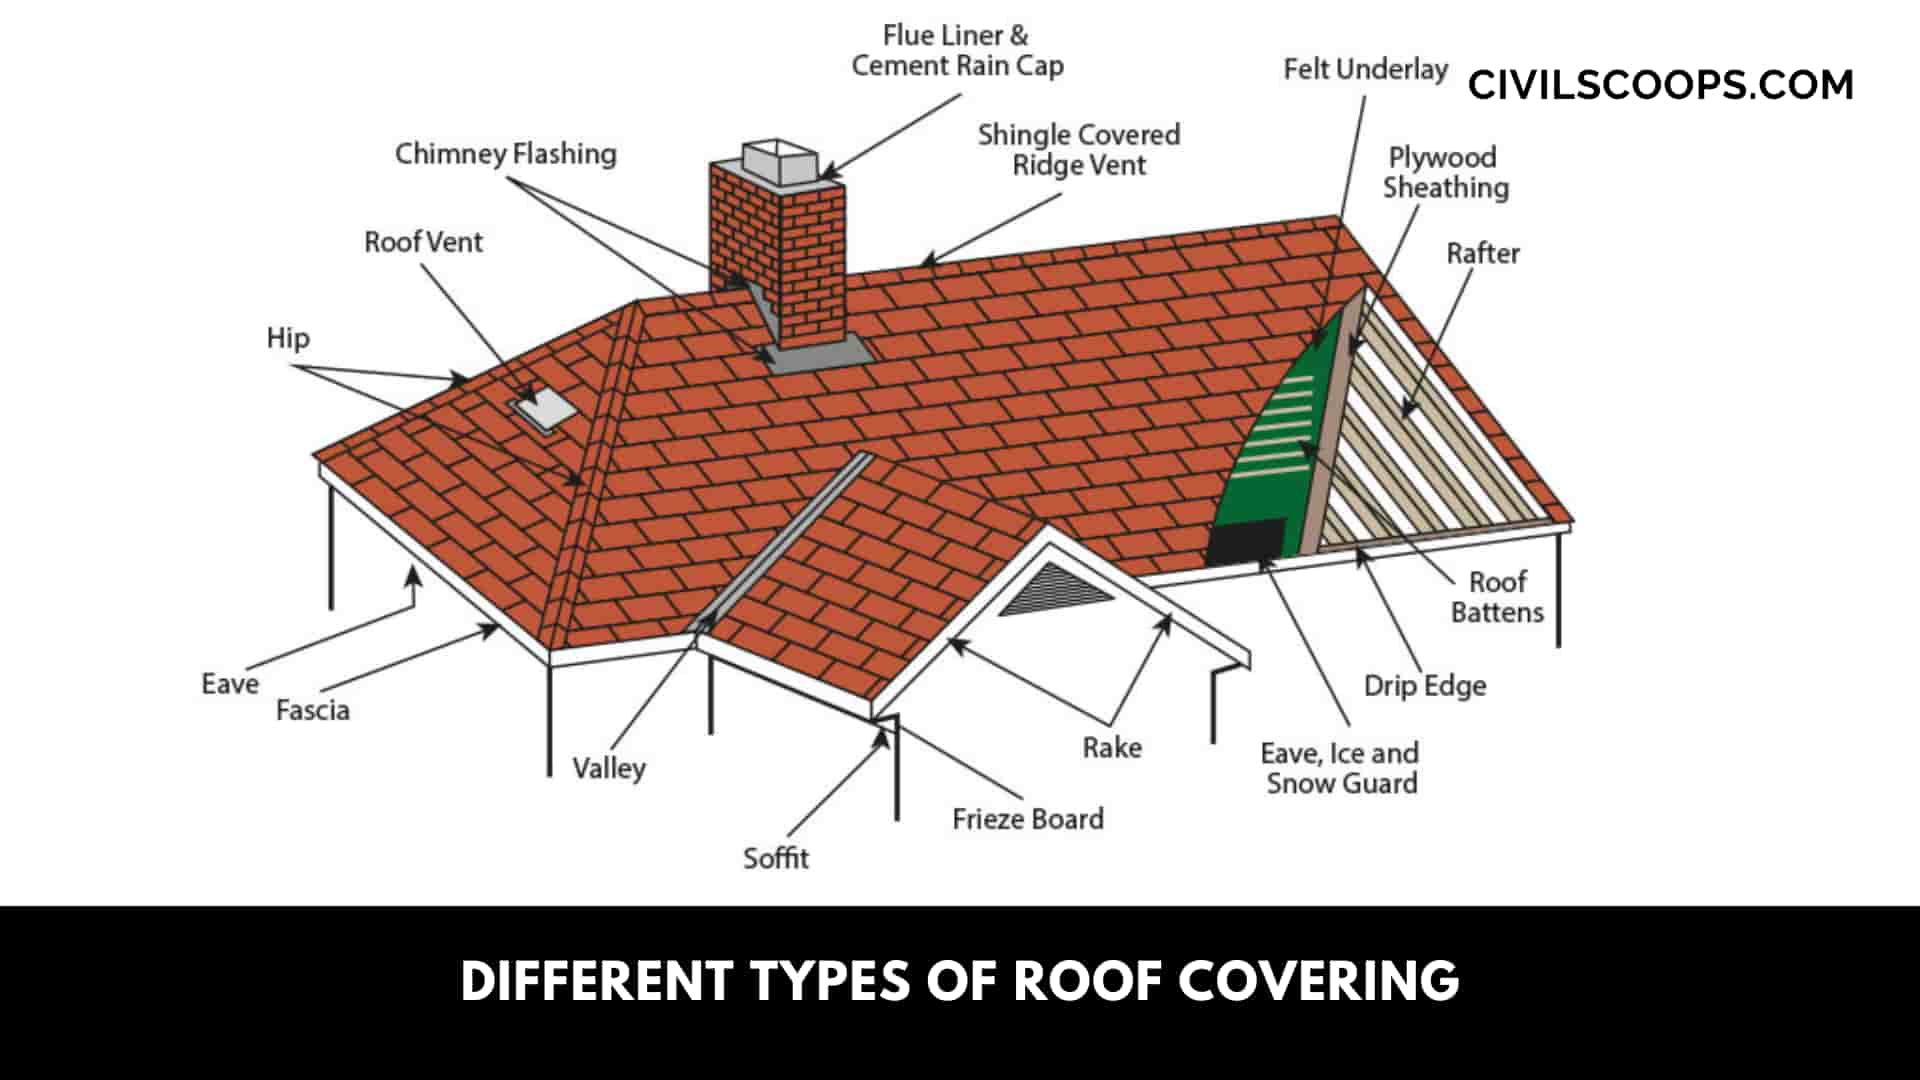 Different Types of Roof Covering